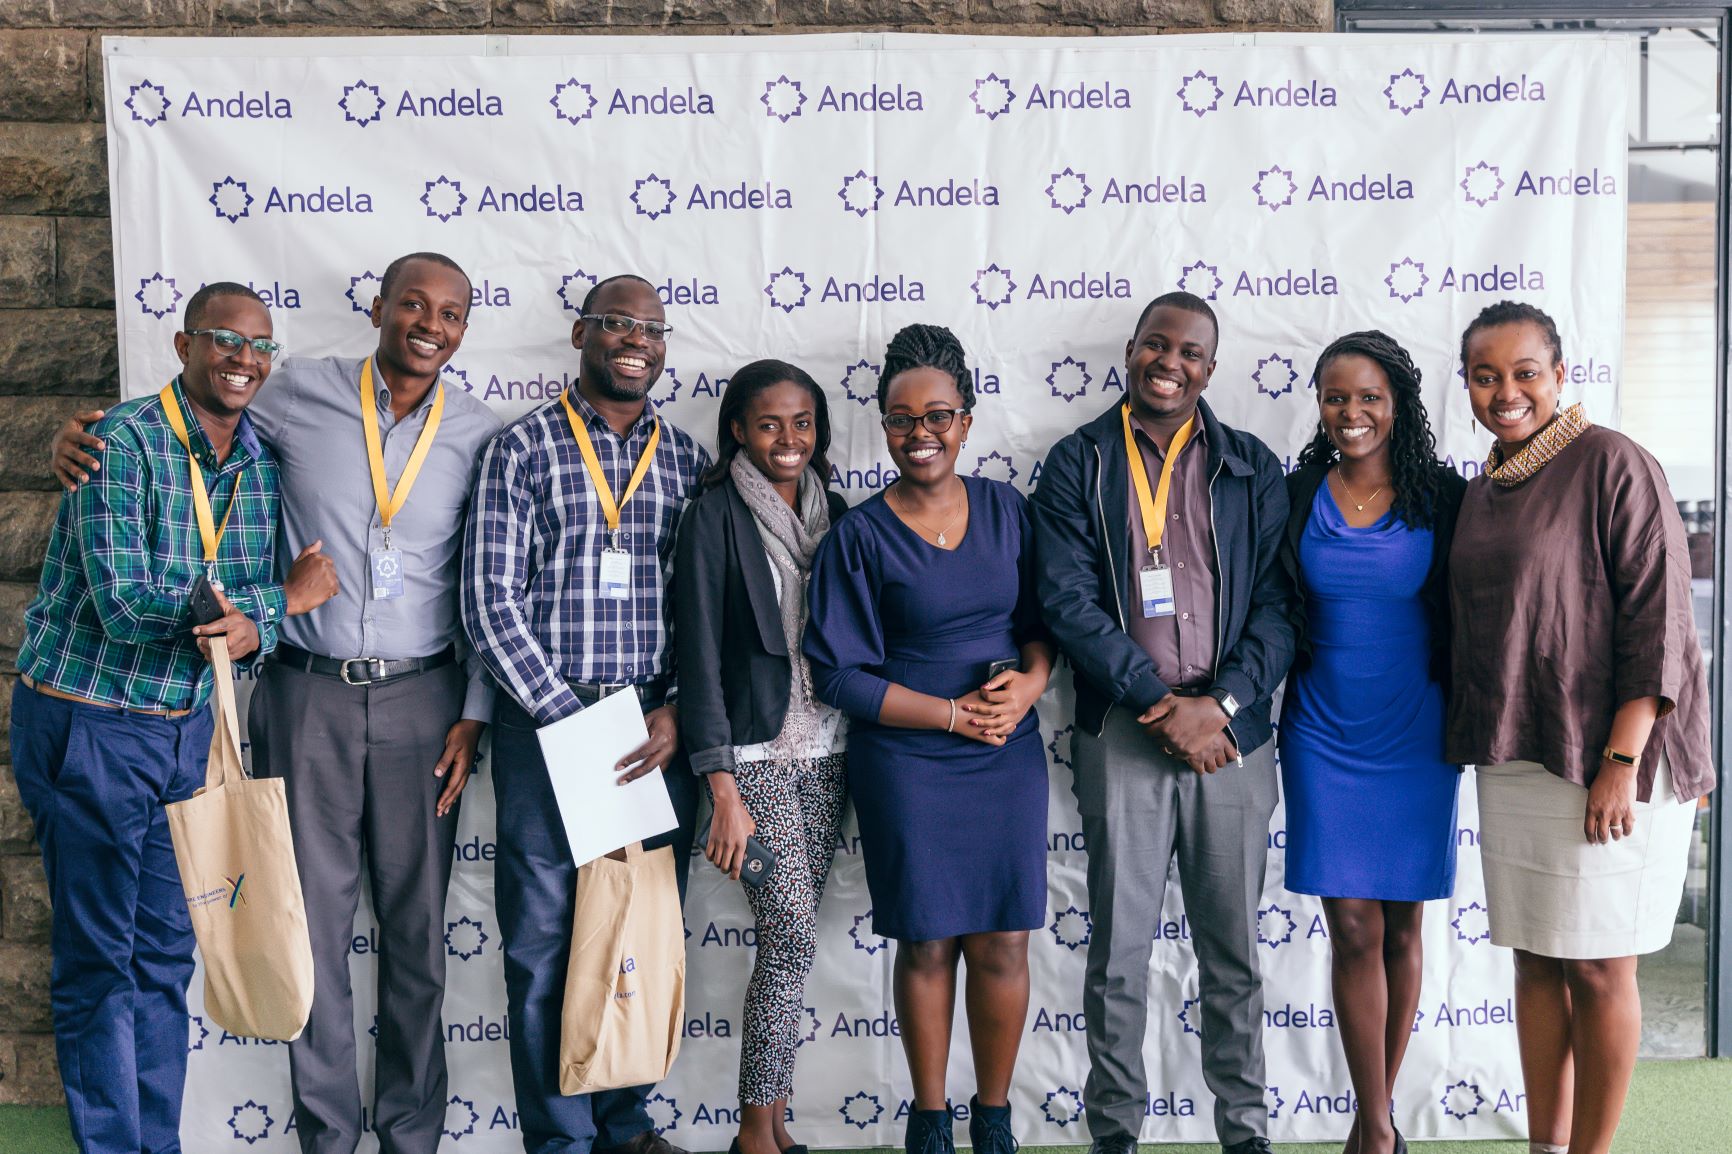 Andela launches Power  of “✗” campaign as it scales engineering teams across Africa